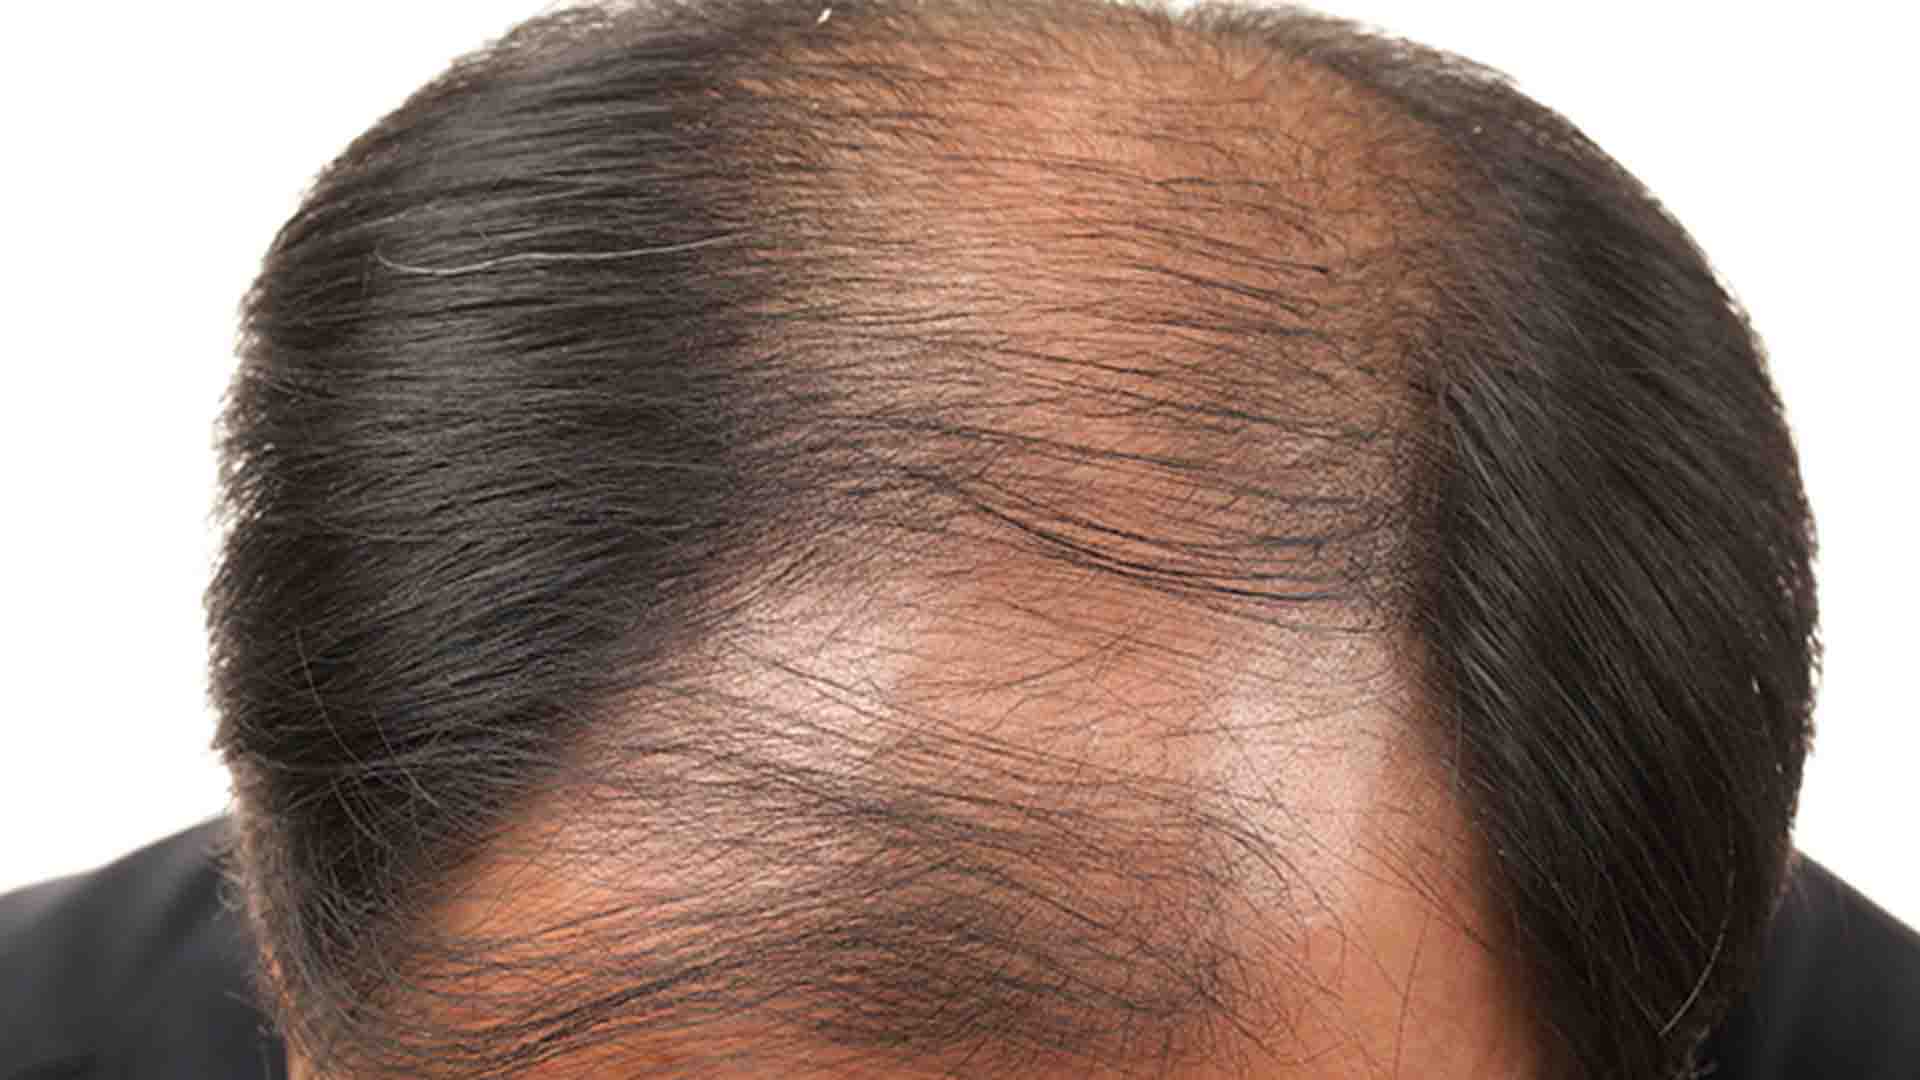 Causes Symptoms And Treatment For Male Pattern Baldness